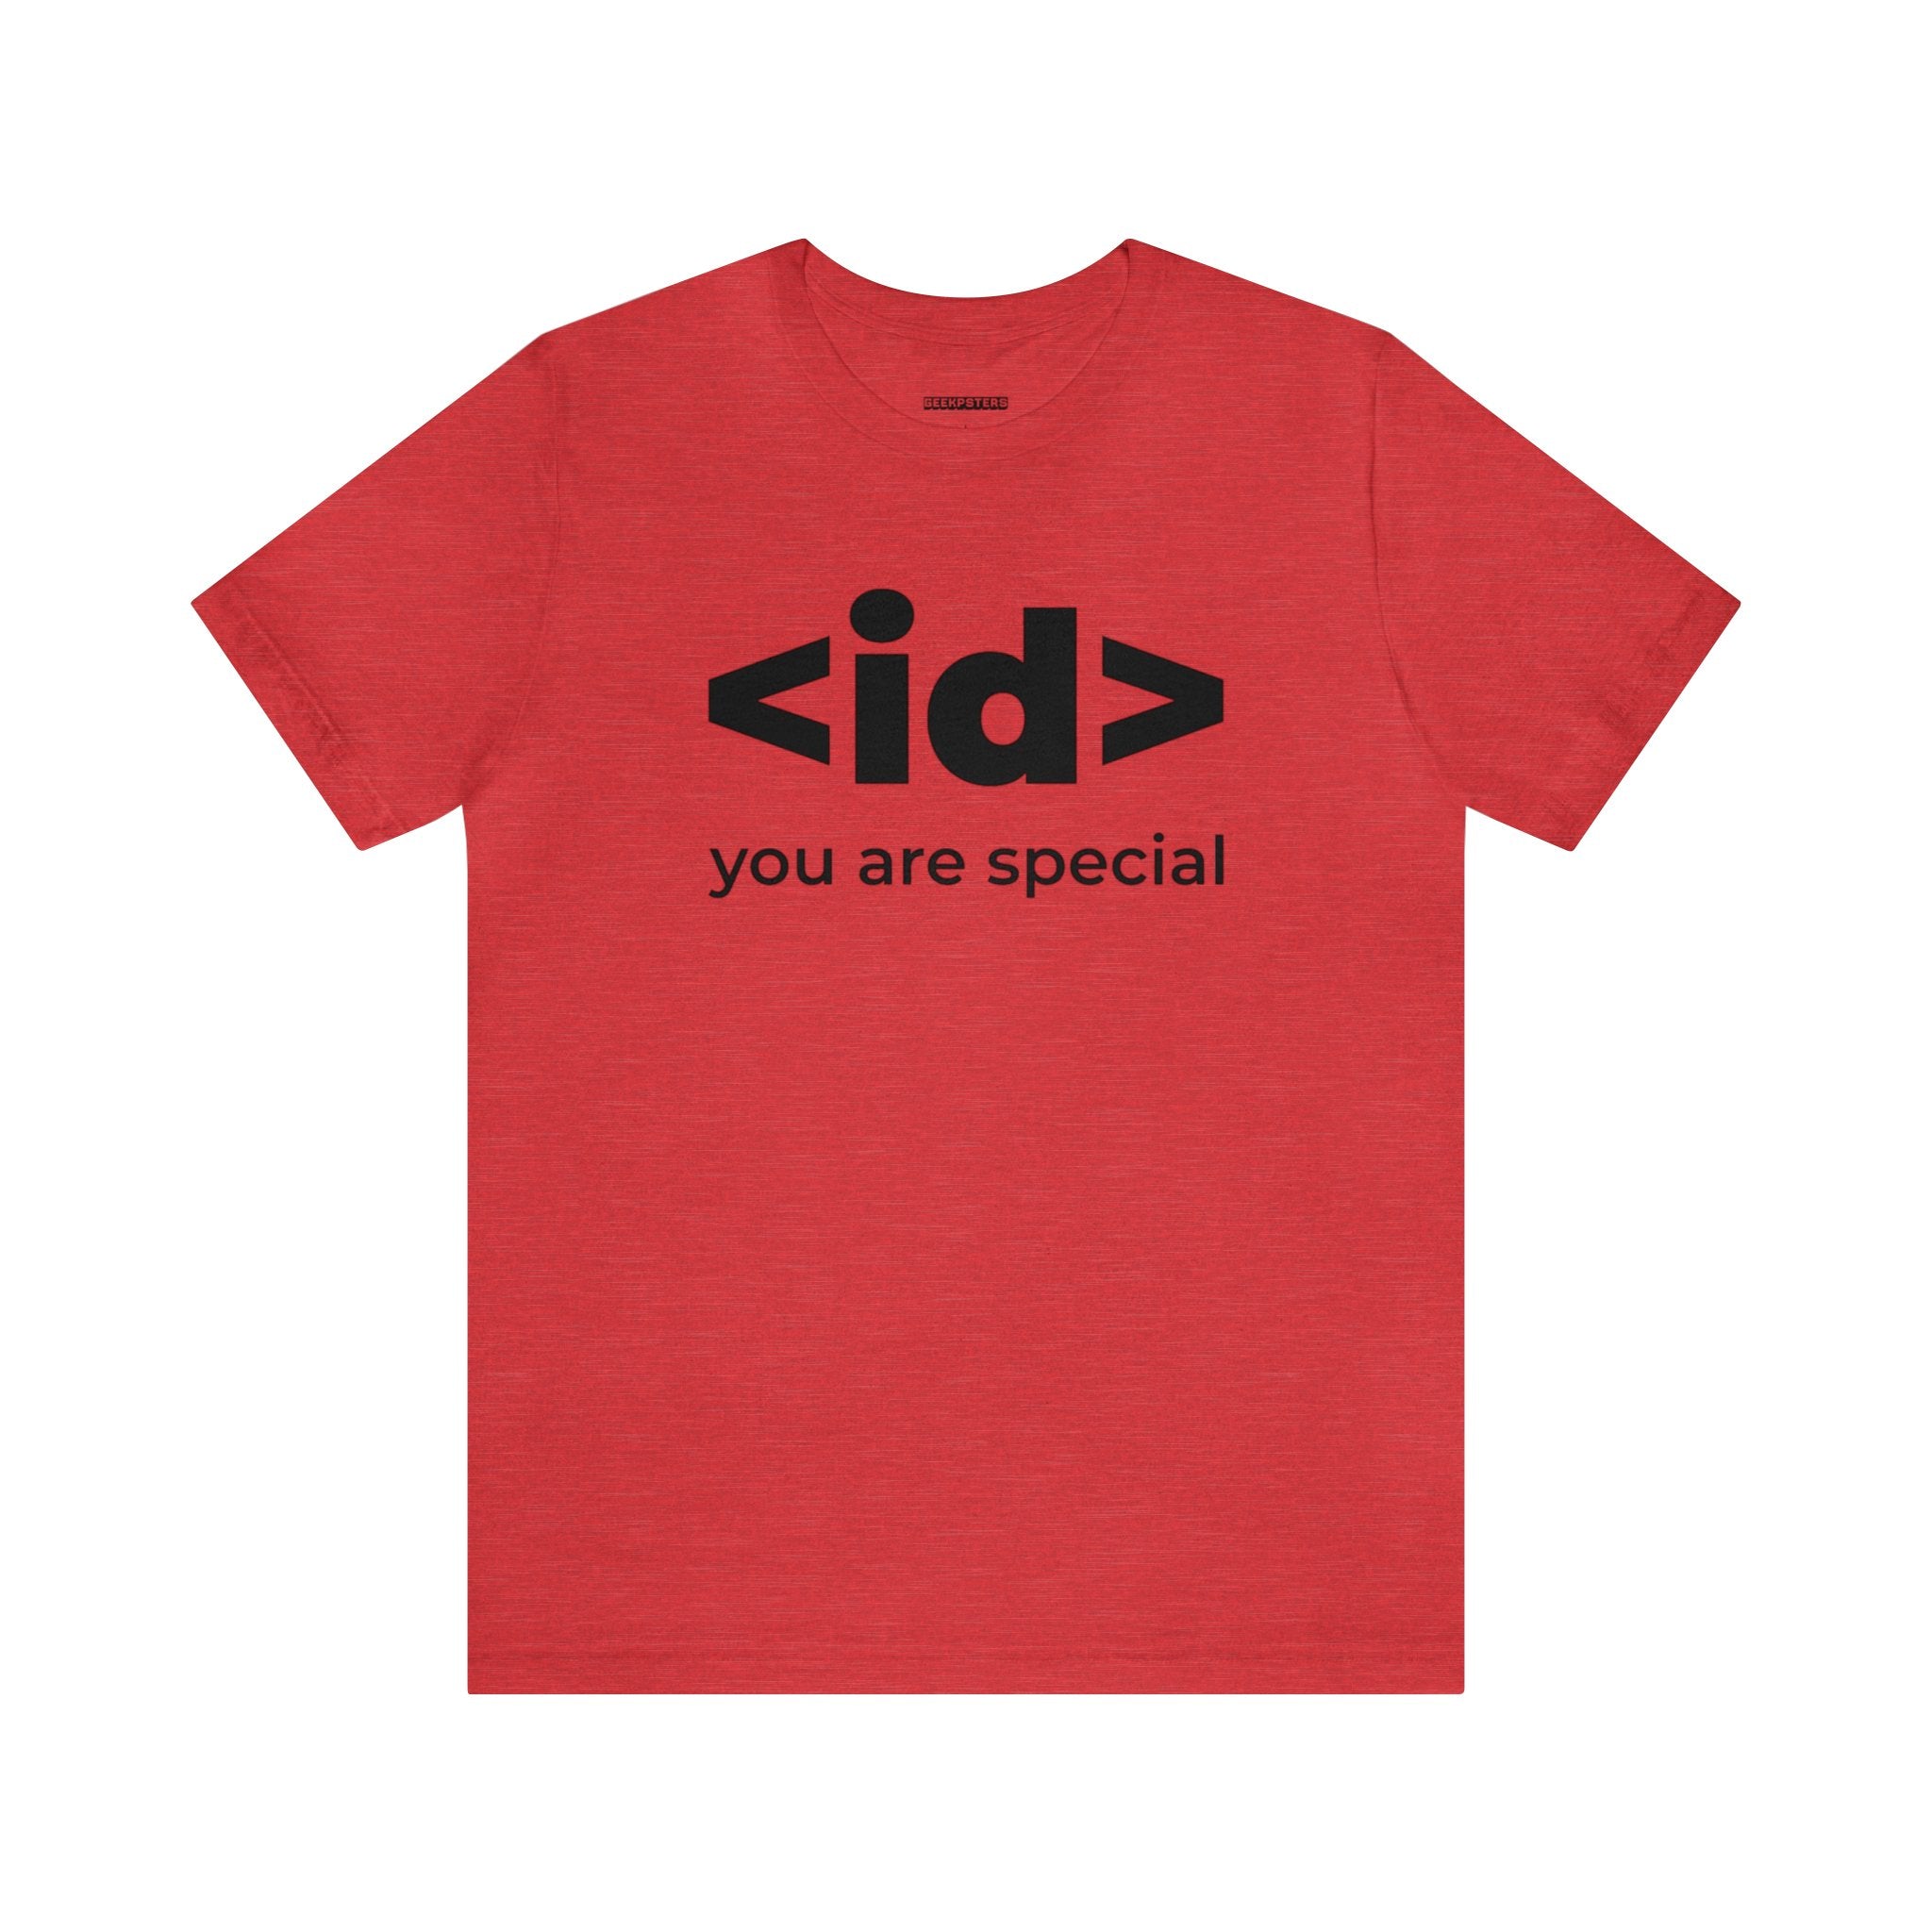 A brilliant red <id> You Are Special T-Shirt that proudly shows off the phrase "if you are special.